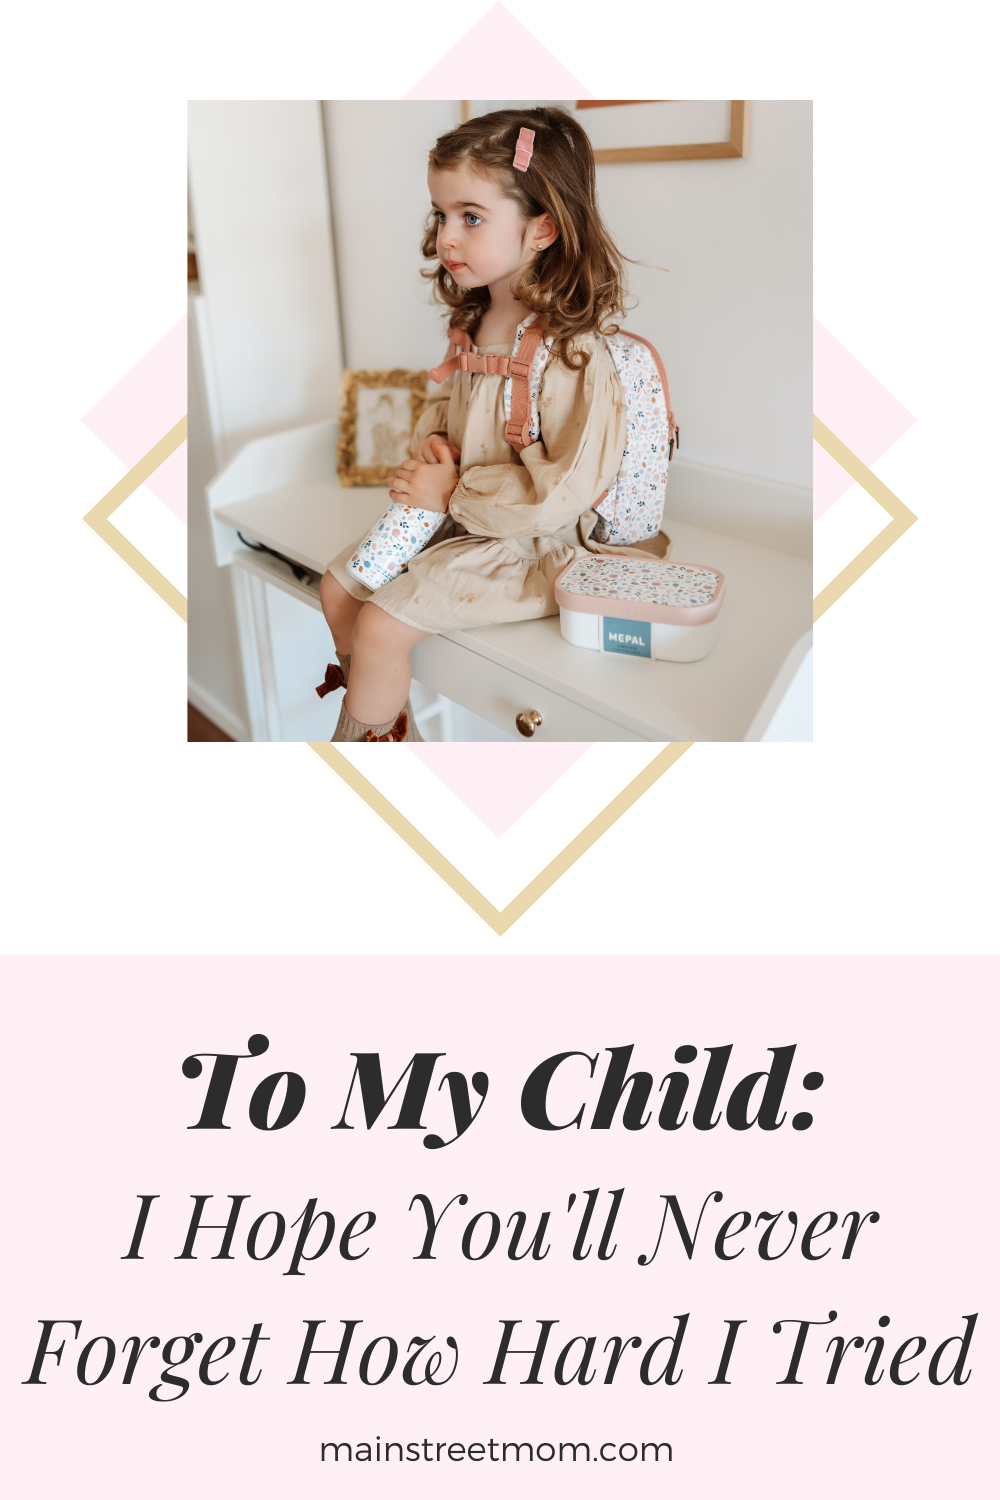 To My Child: I Hope You'll Never Forget How Hard I Tried